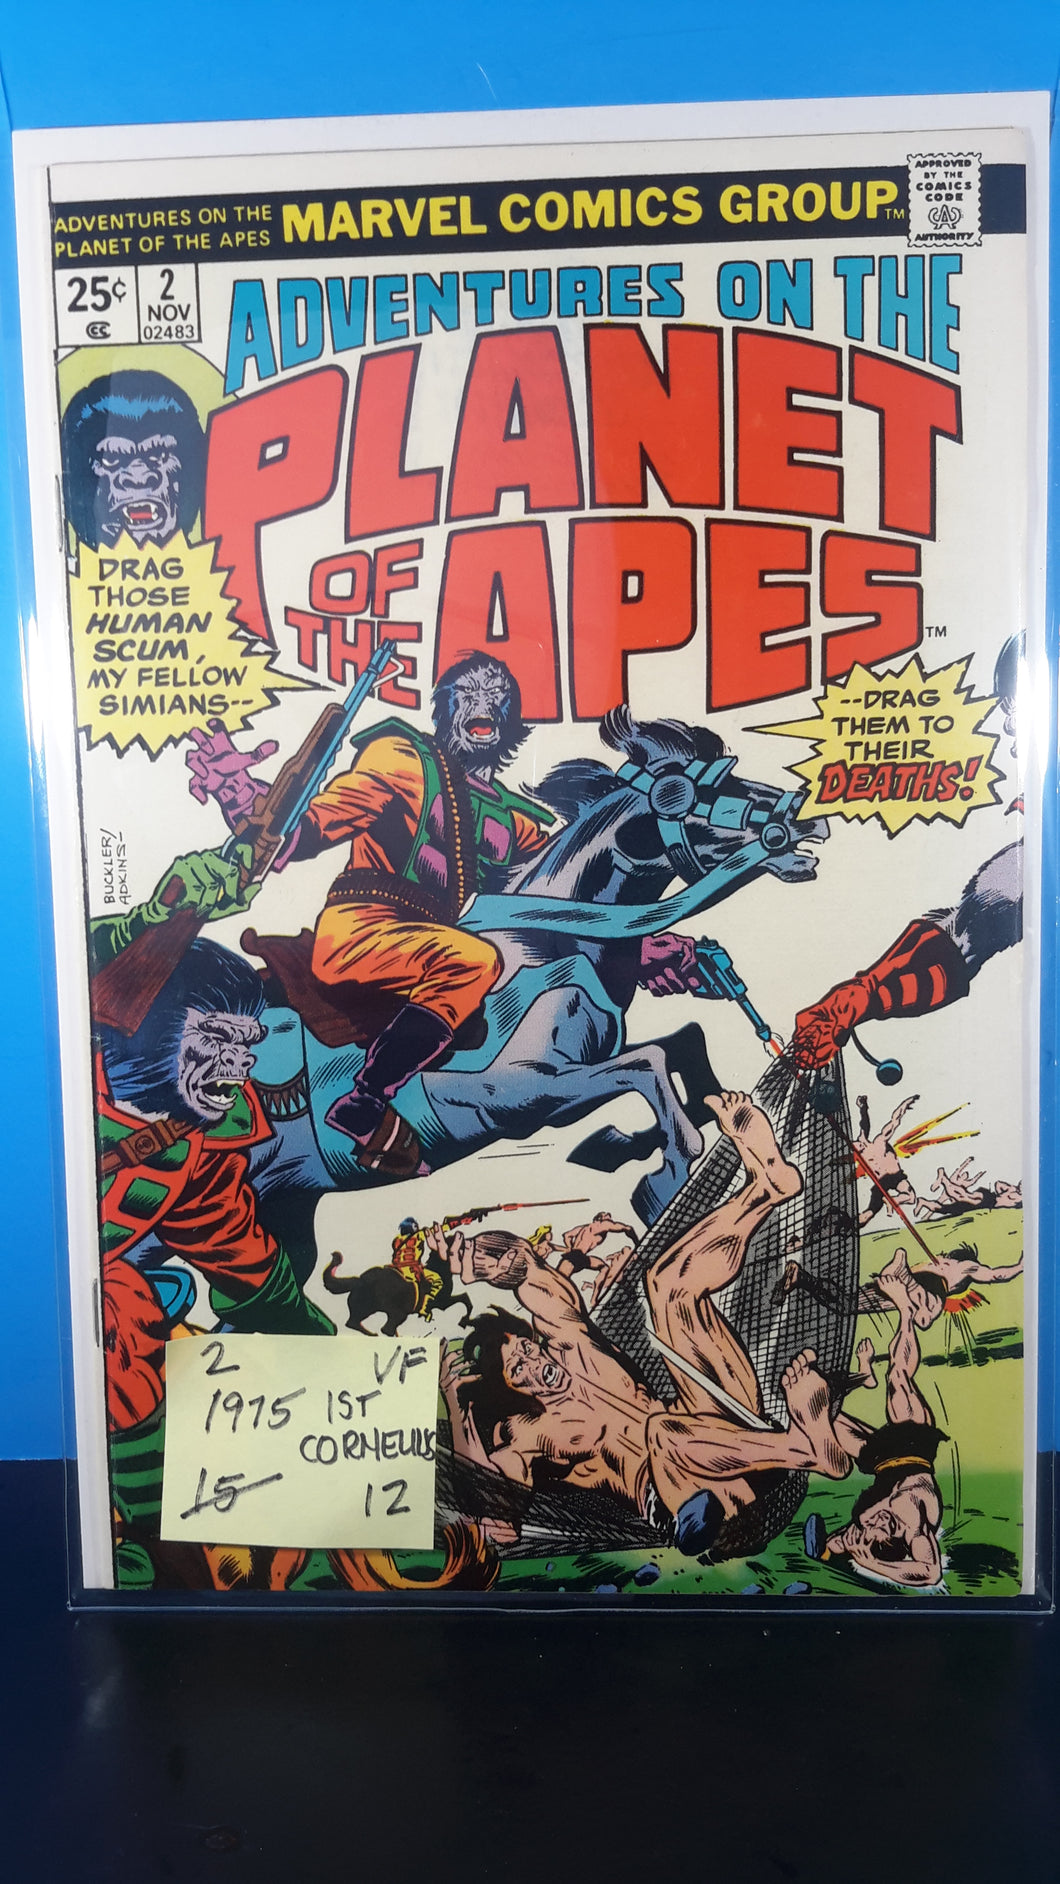 ADVENTURES ON THE PLANET OF THE APES #2